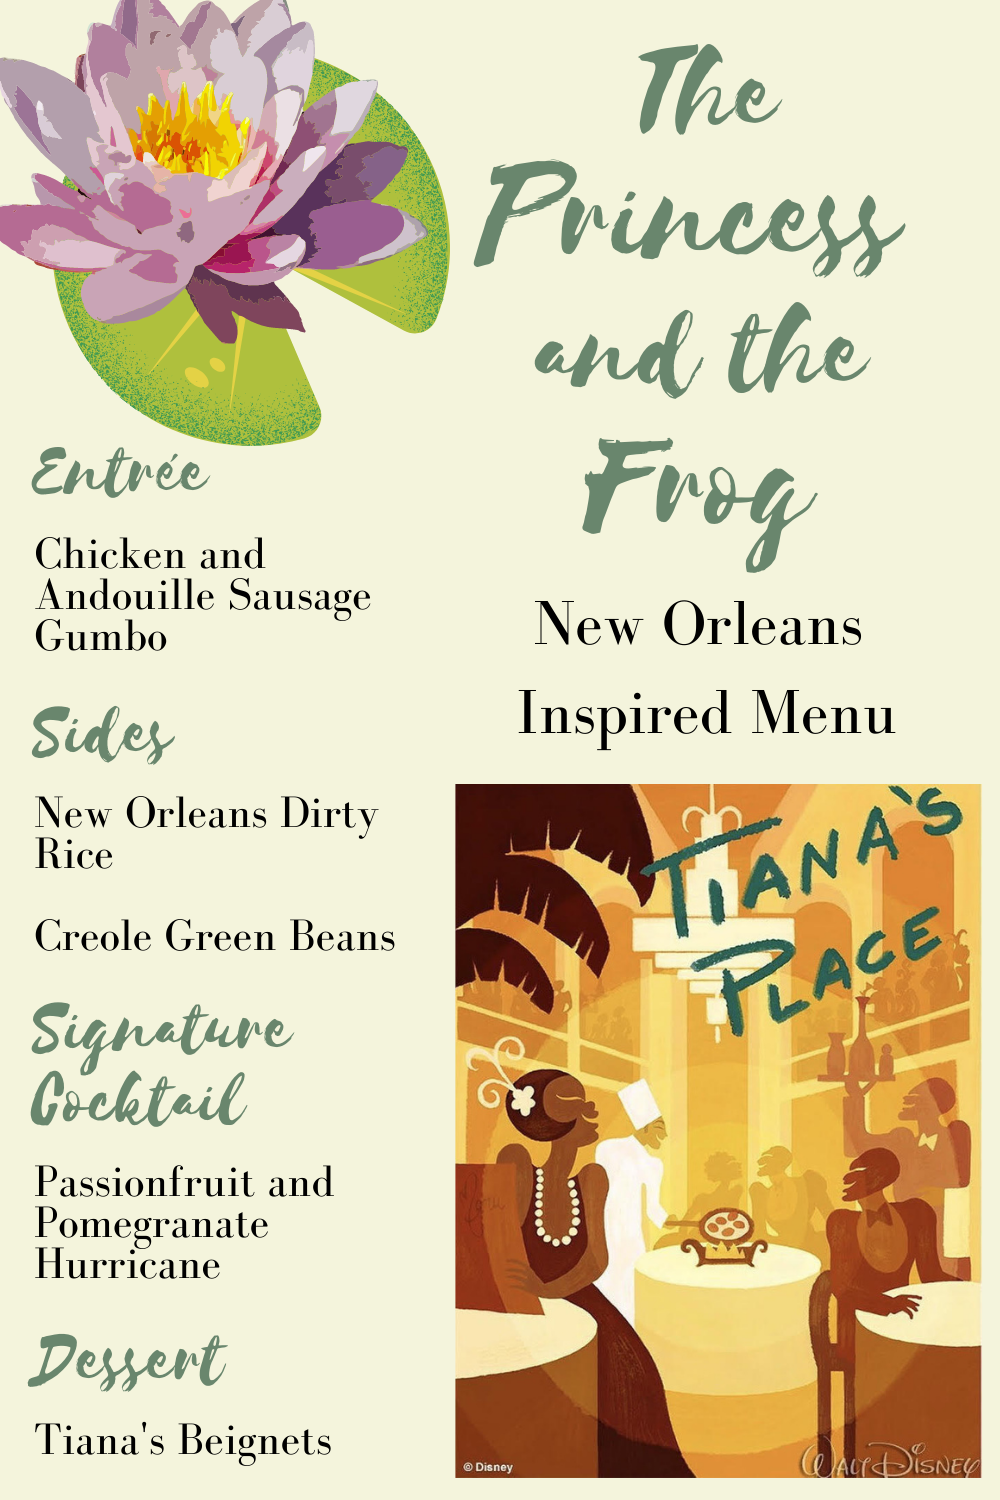 https://fargomom.com/family-movie-night-create-a-movie-themed-dinner/princess-and-the-frog-new-orleans-inspired-menu/